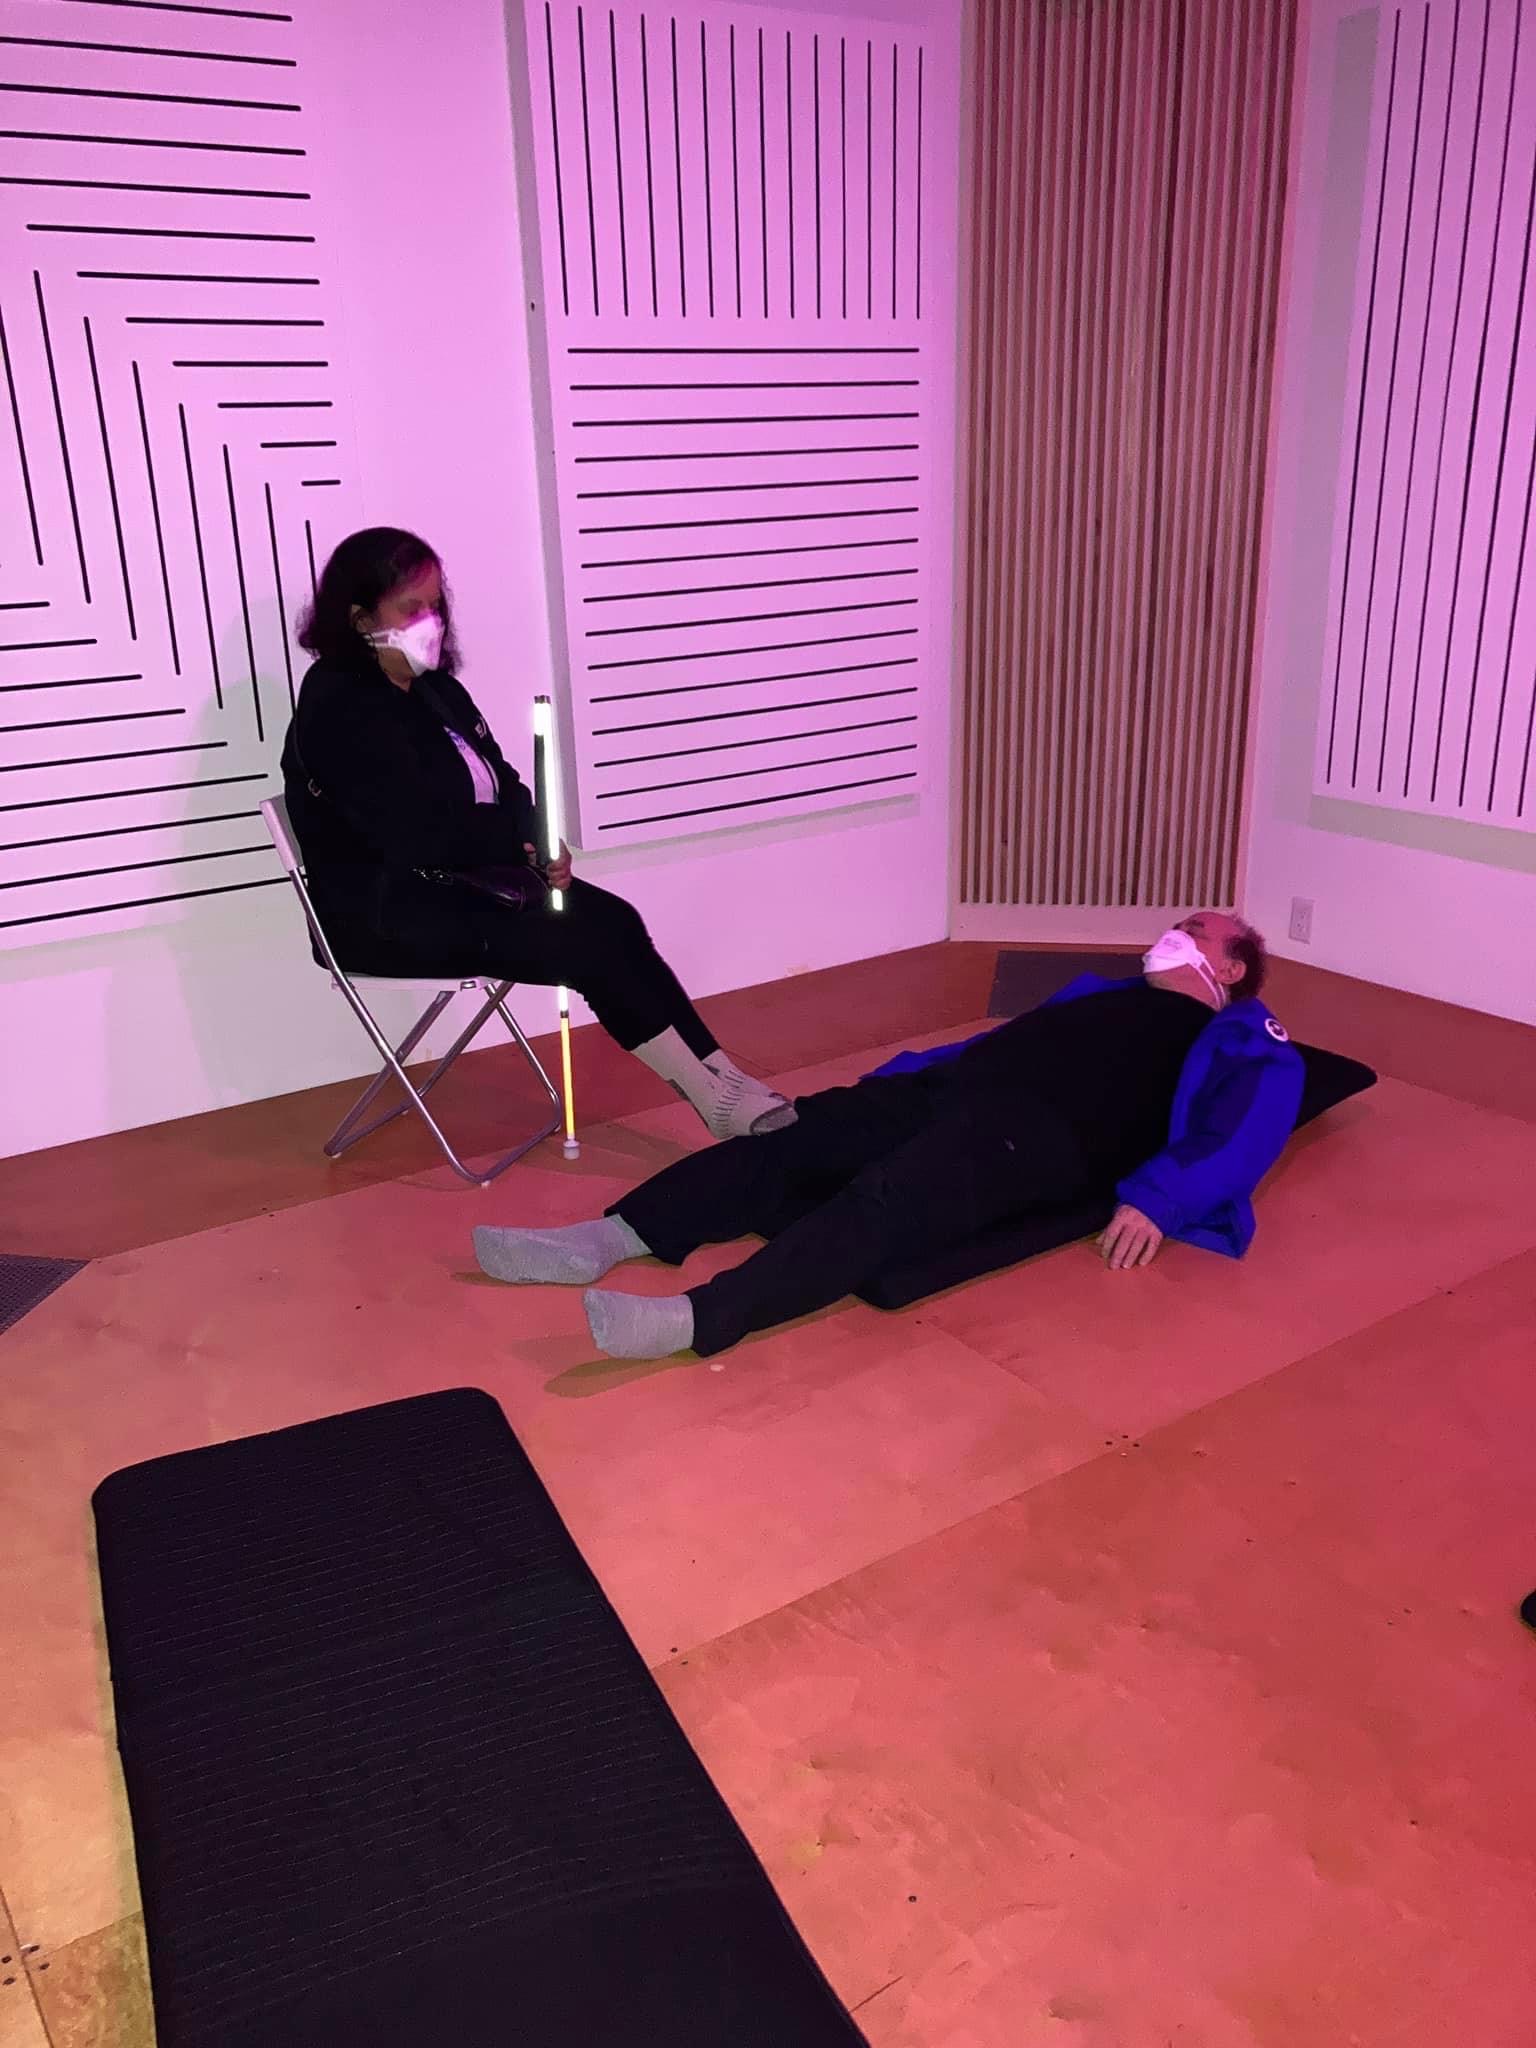 Kristy sits in a folding chair against a wall while Shawn lies on a foam mat at Lobe Studios in Vancouver.